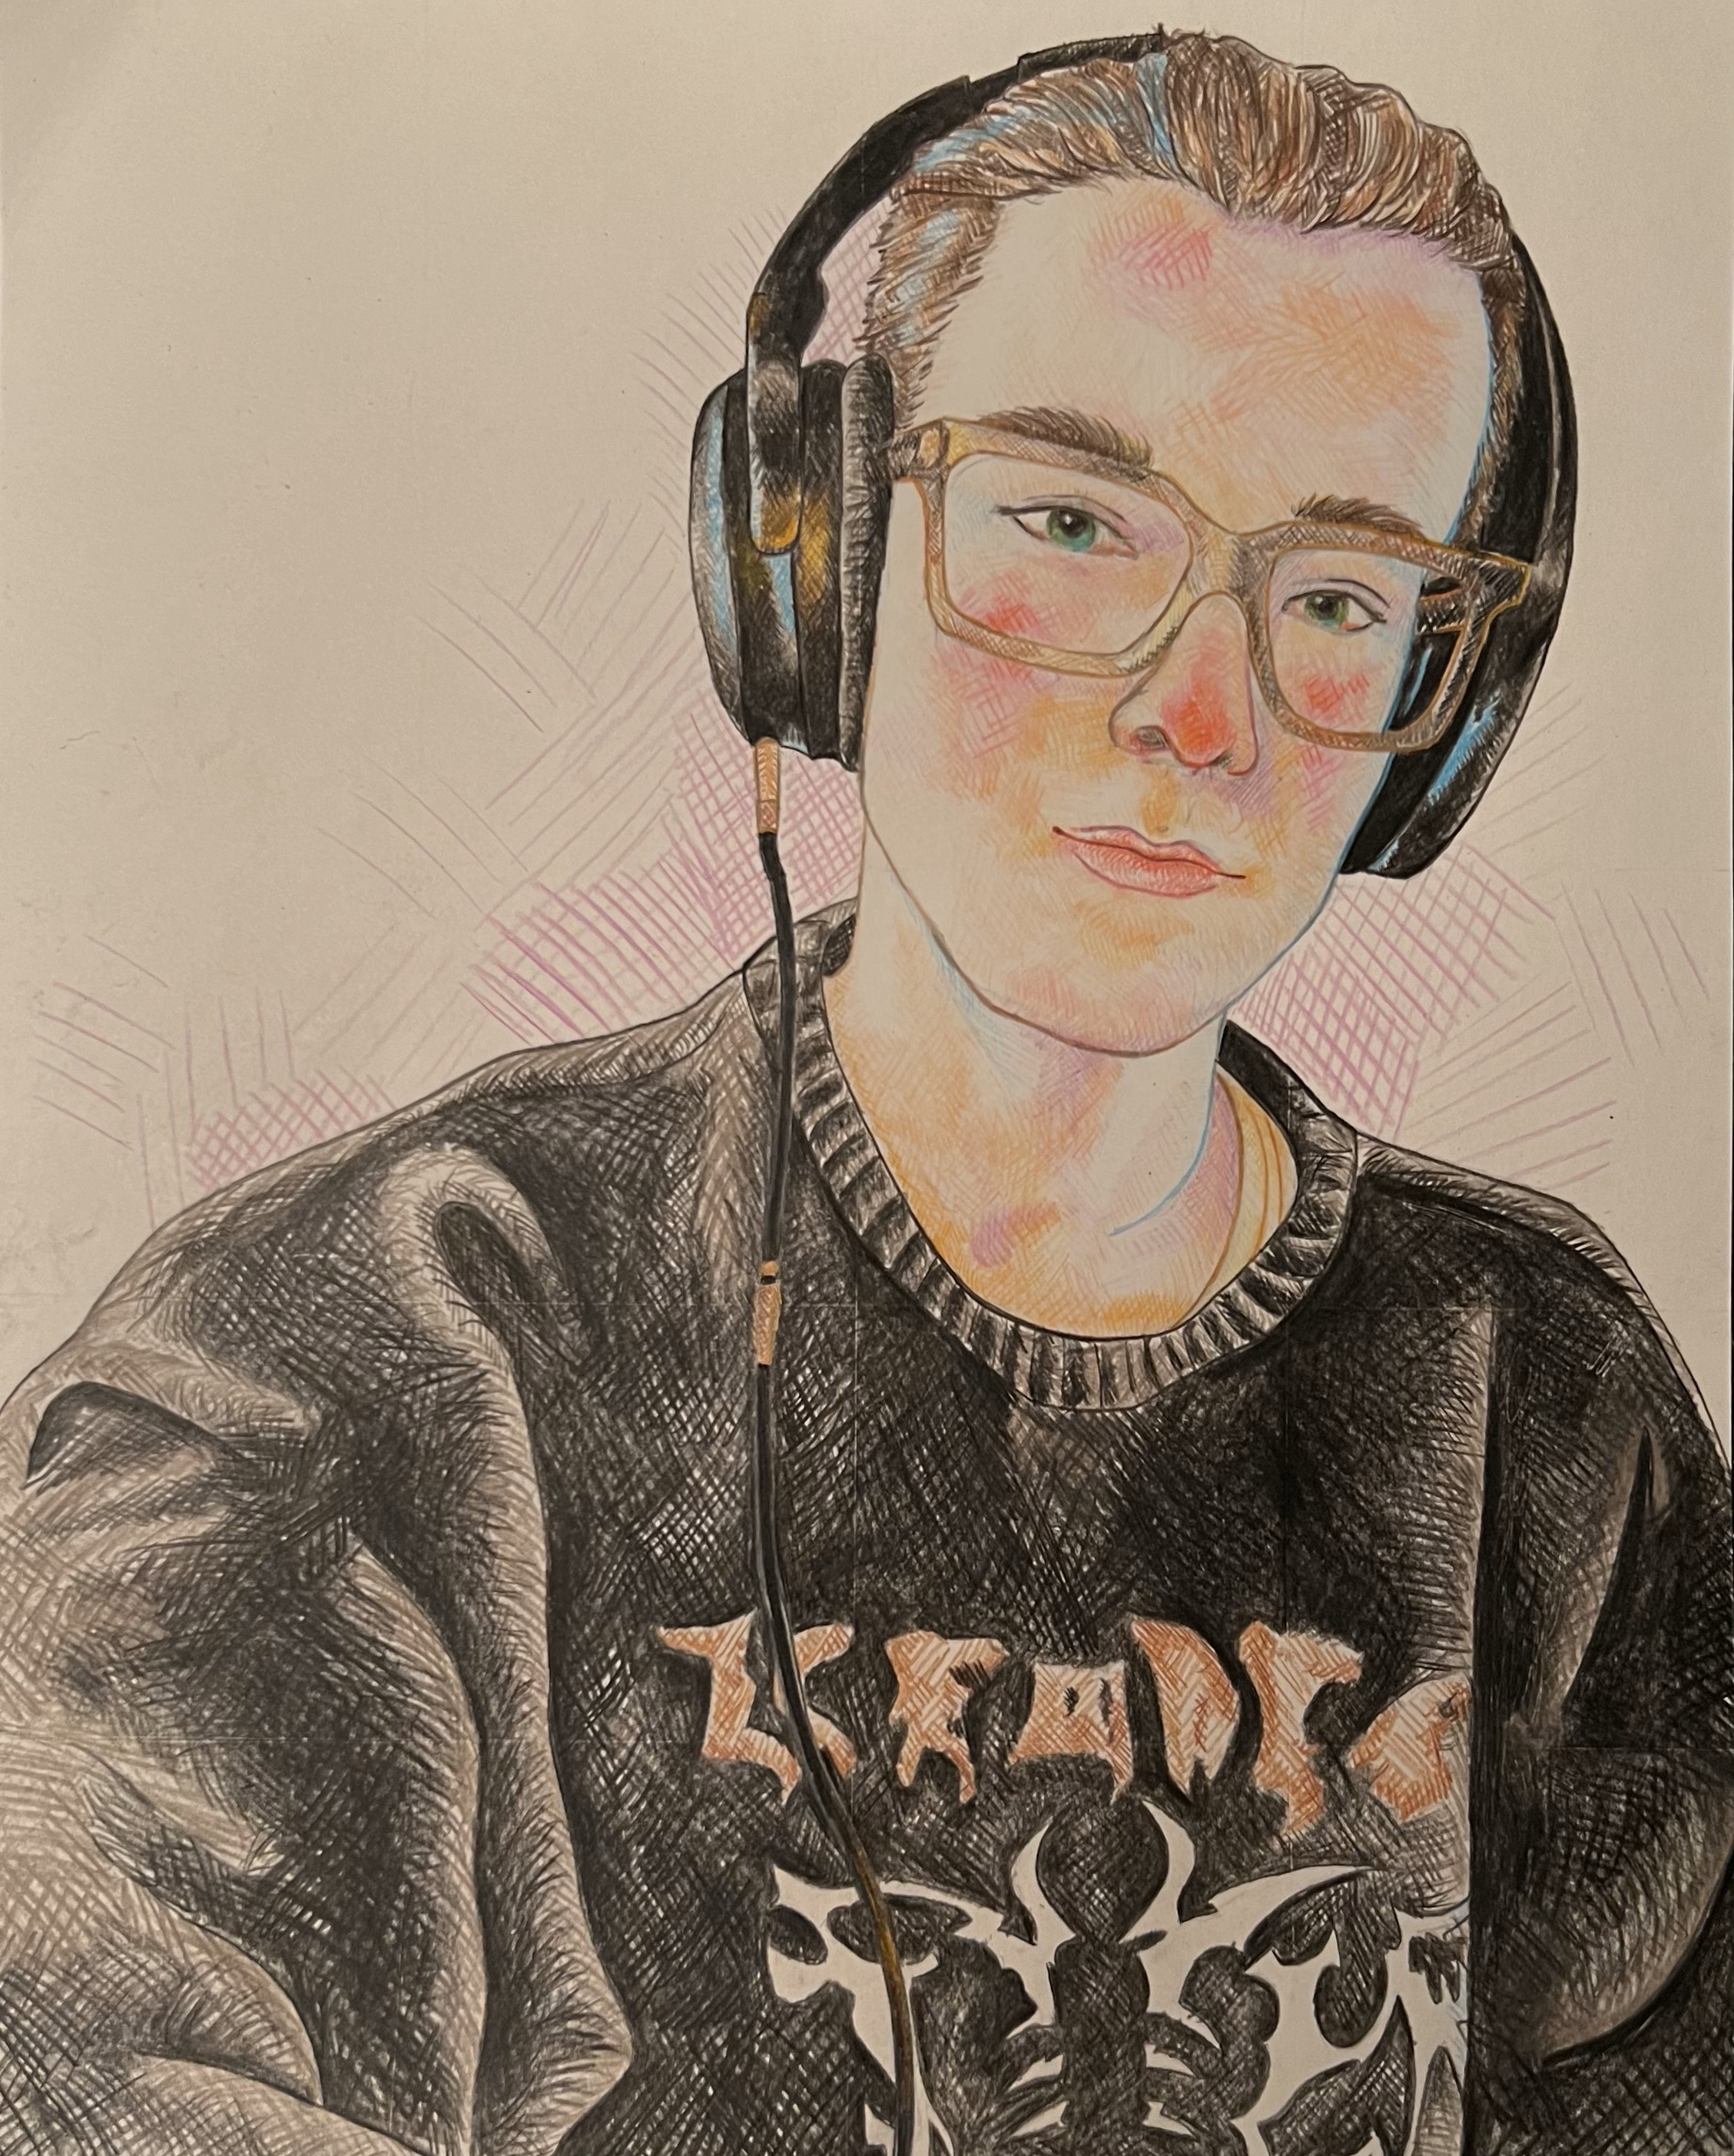 a cross hatched pencil crayon portrait of a young man with brown hair, thick glasses, and a black sweater with bones on it.